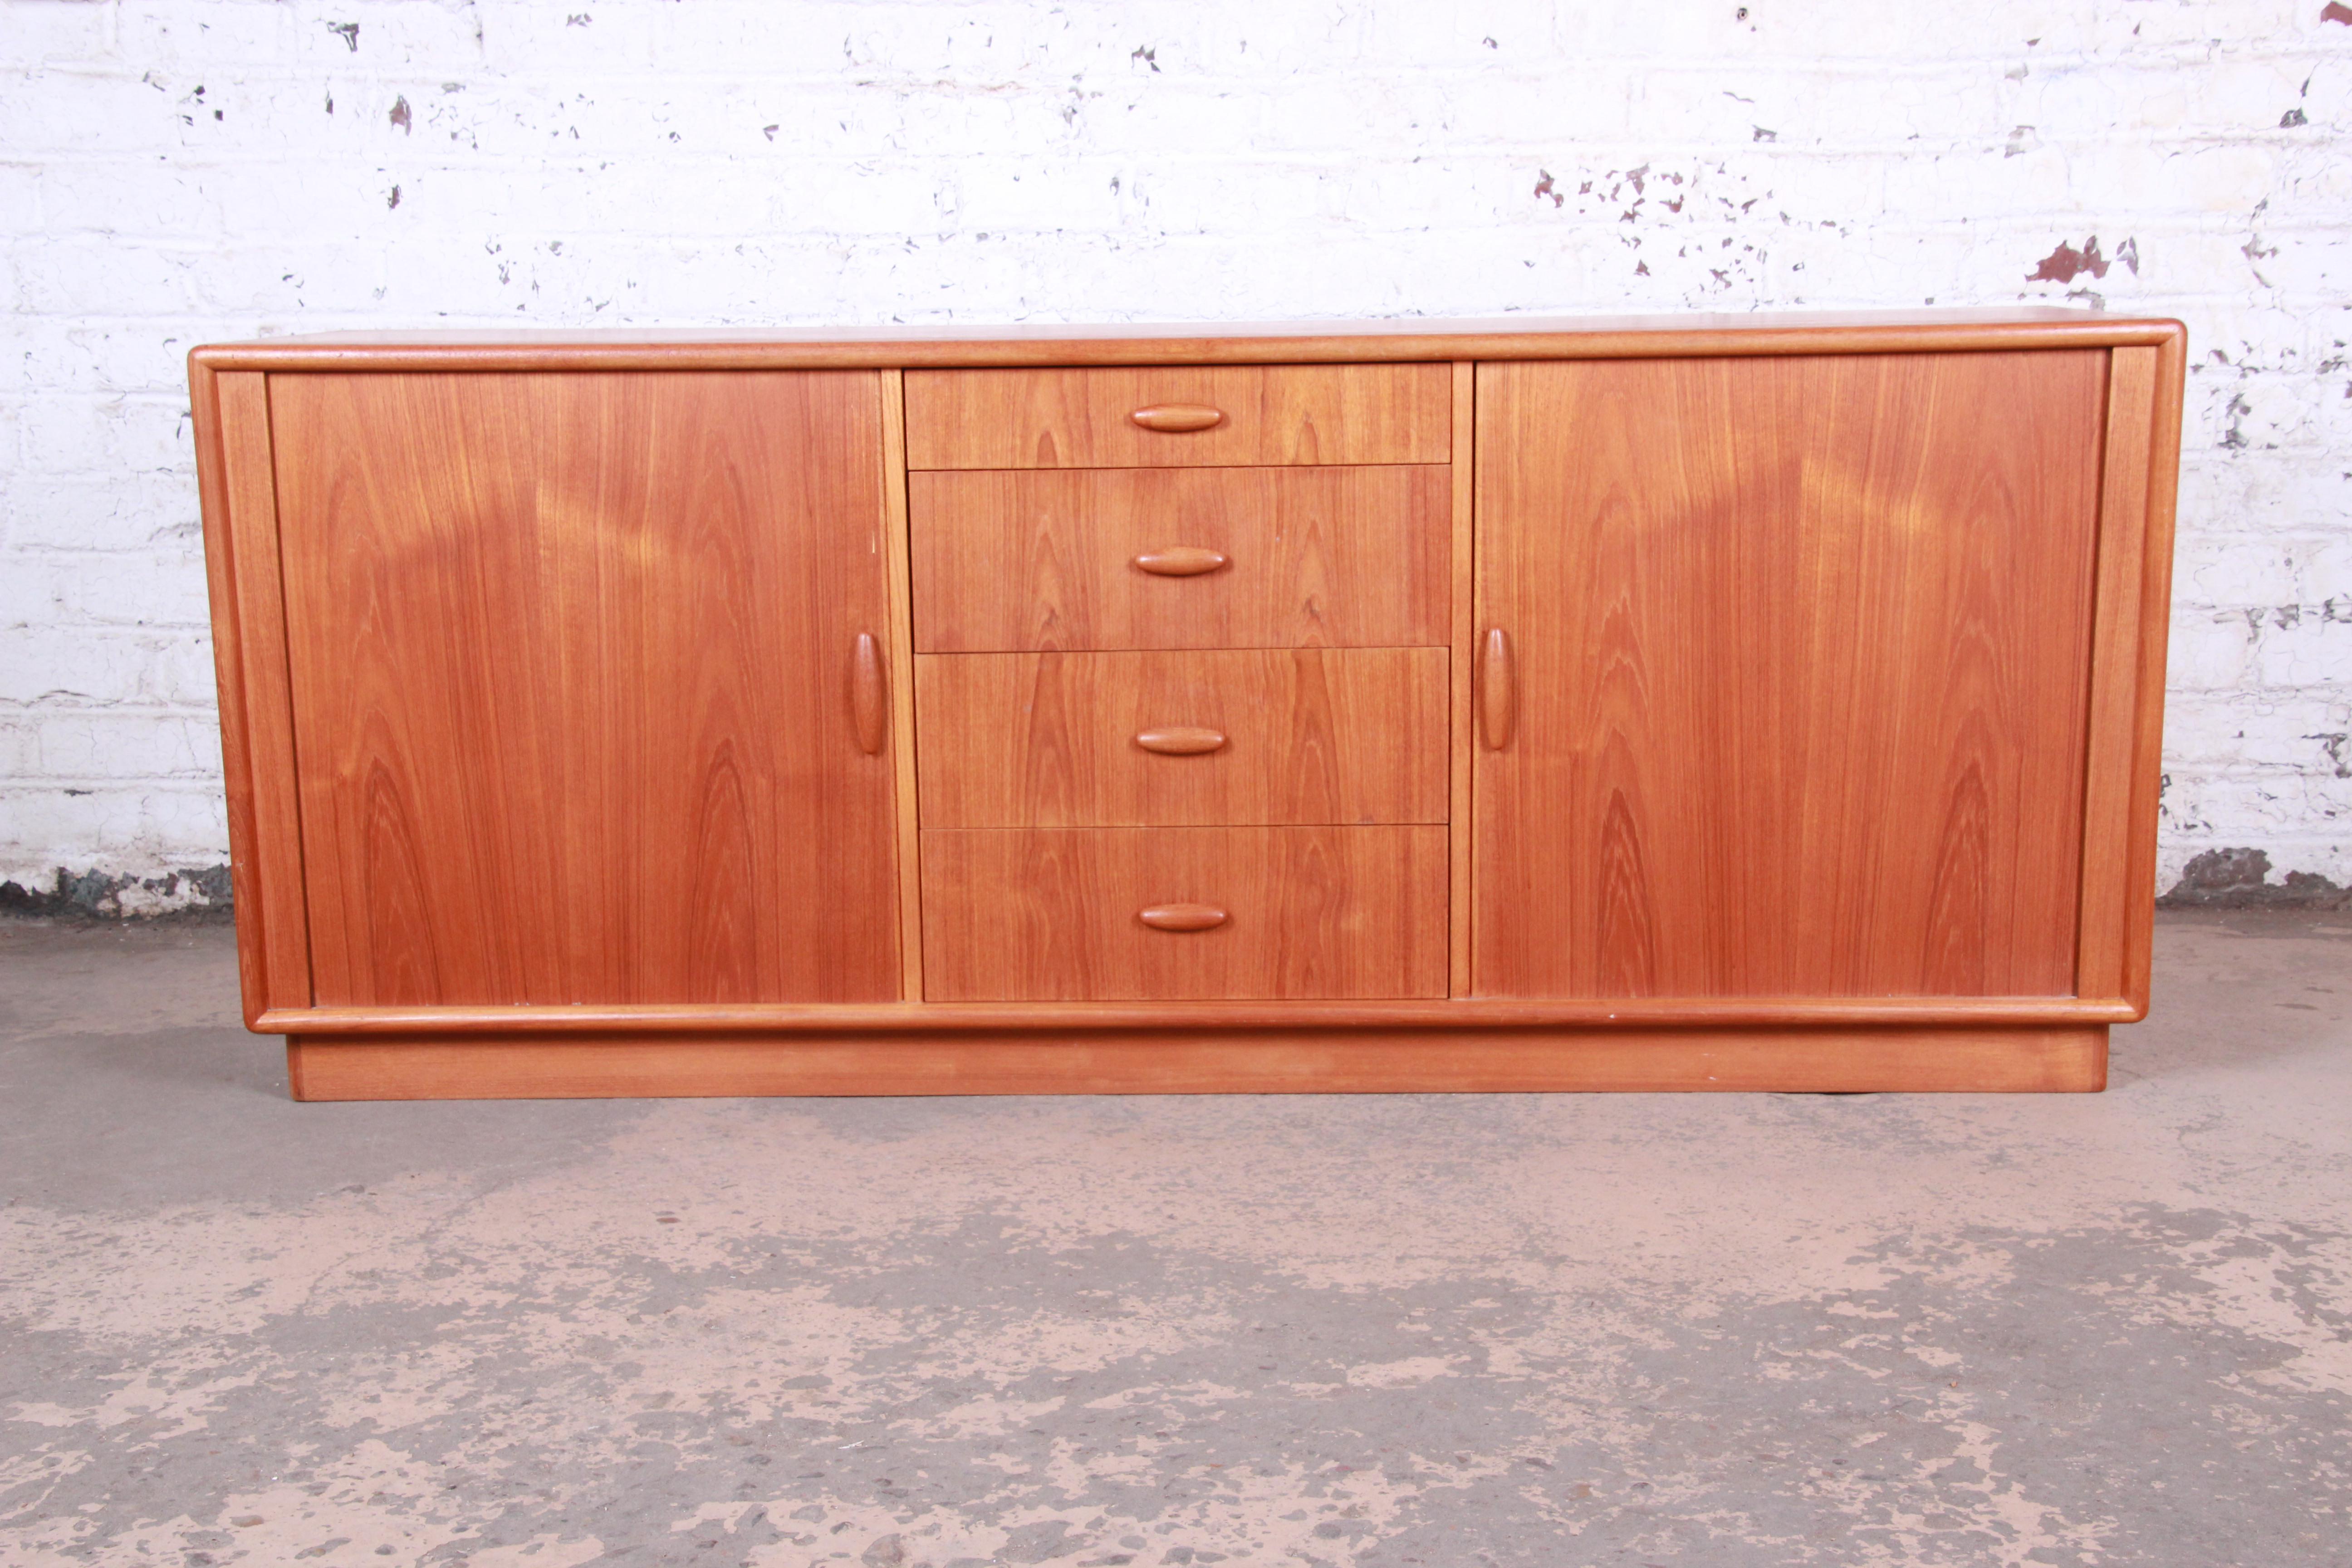 A gorgeous midcentury Danish modern teak credenza or long dresser by Dyrlund. The credenza features stunning teak wood grain and sleek midcentury Danish design. It offers ample storage, with large cabinets each with two dovetailed drawers behind